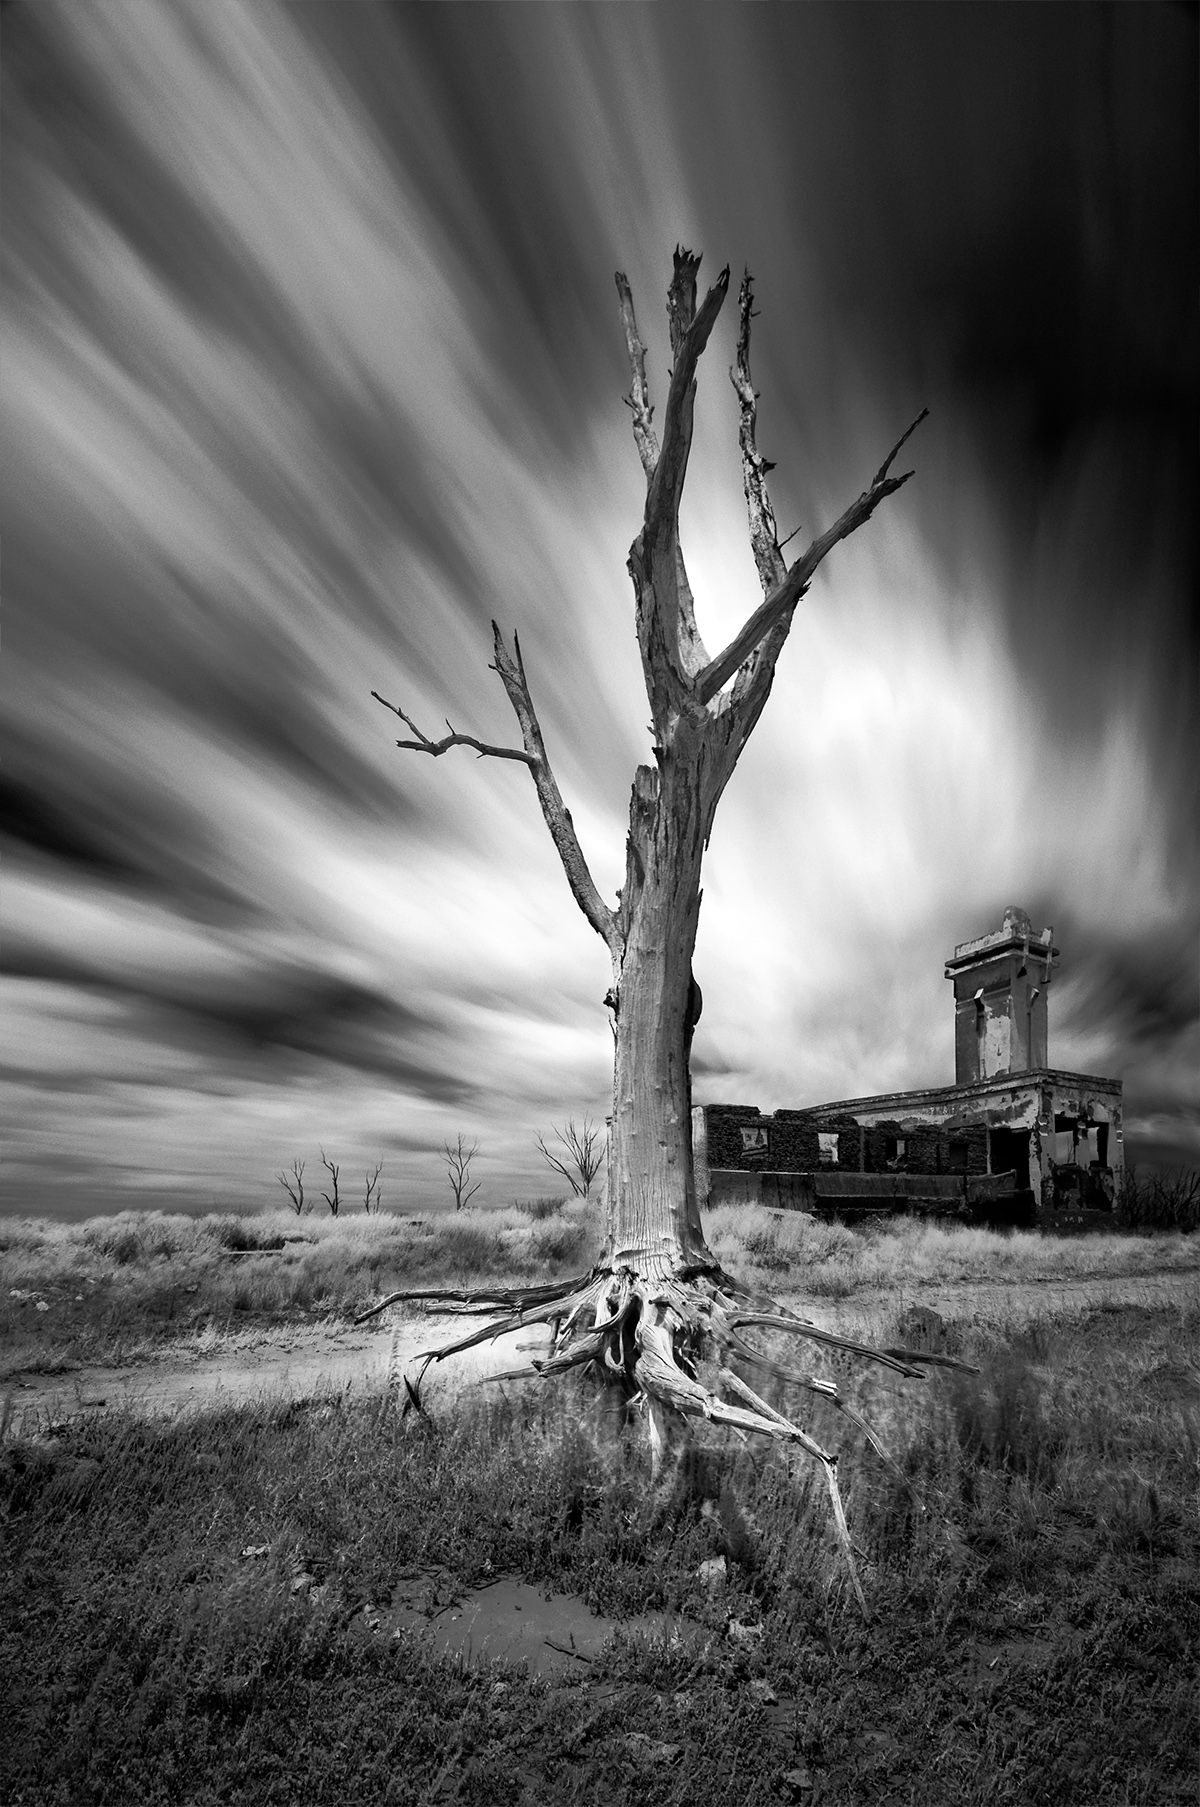 under water salt lake surreal trees bw argentina Carhue disaster atlantis dead trees apocalyptic buenos aires ghost town long exposure